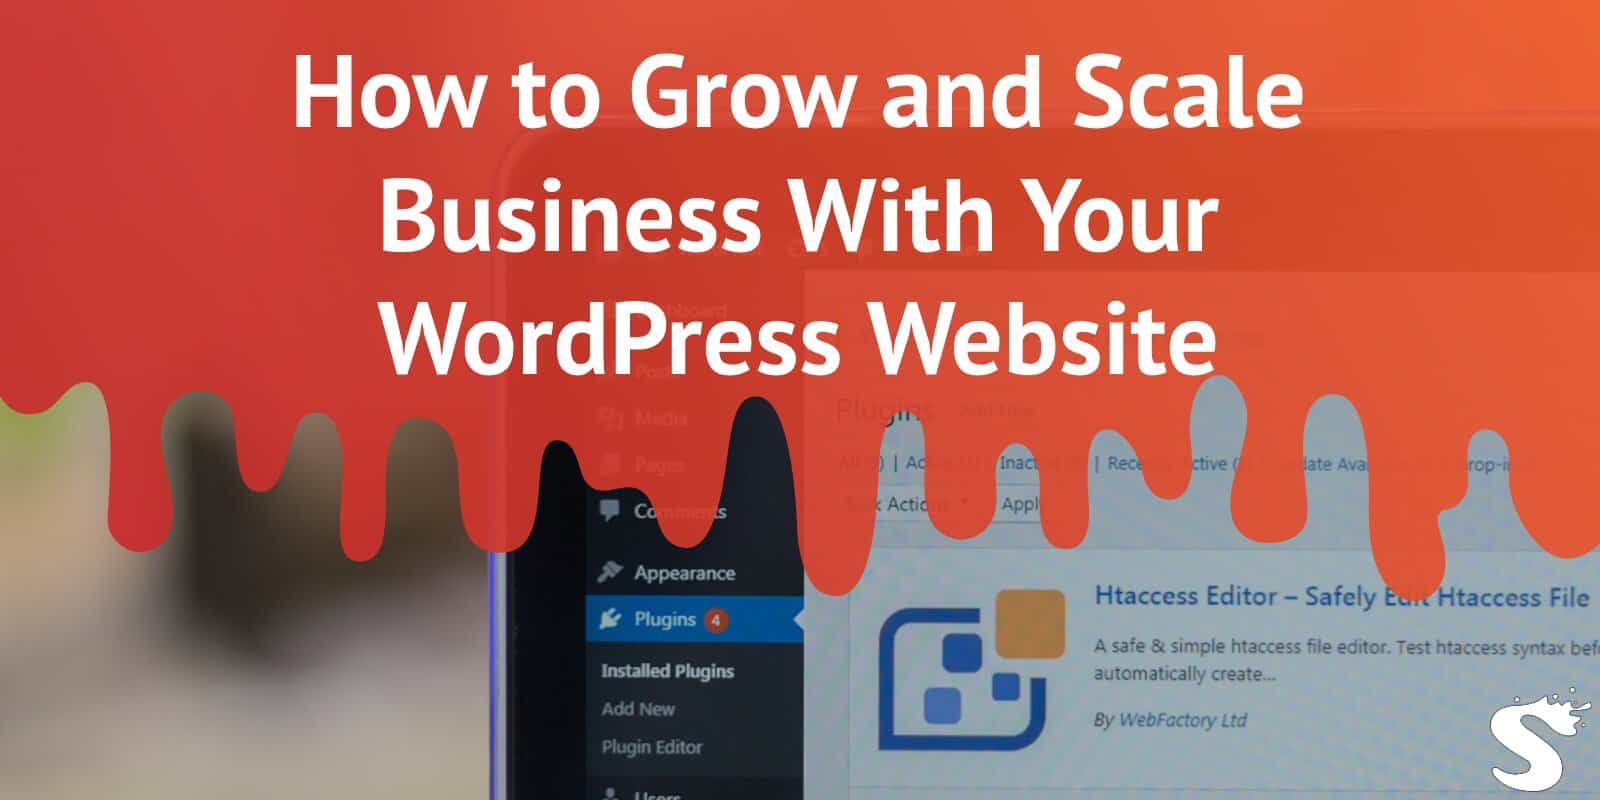 How to Grow and Scale Business With Your WordPress Website